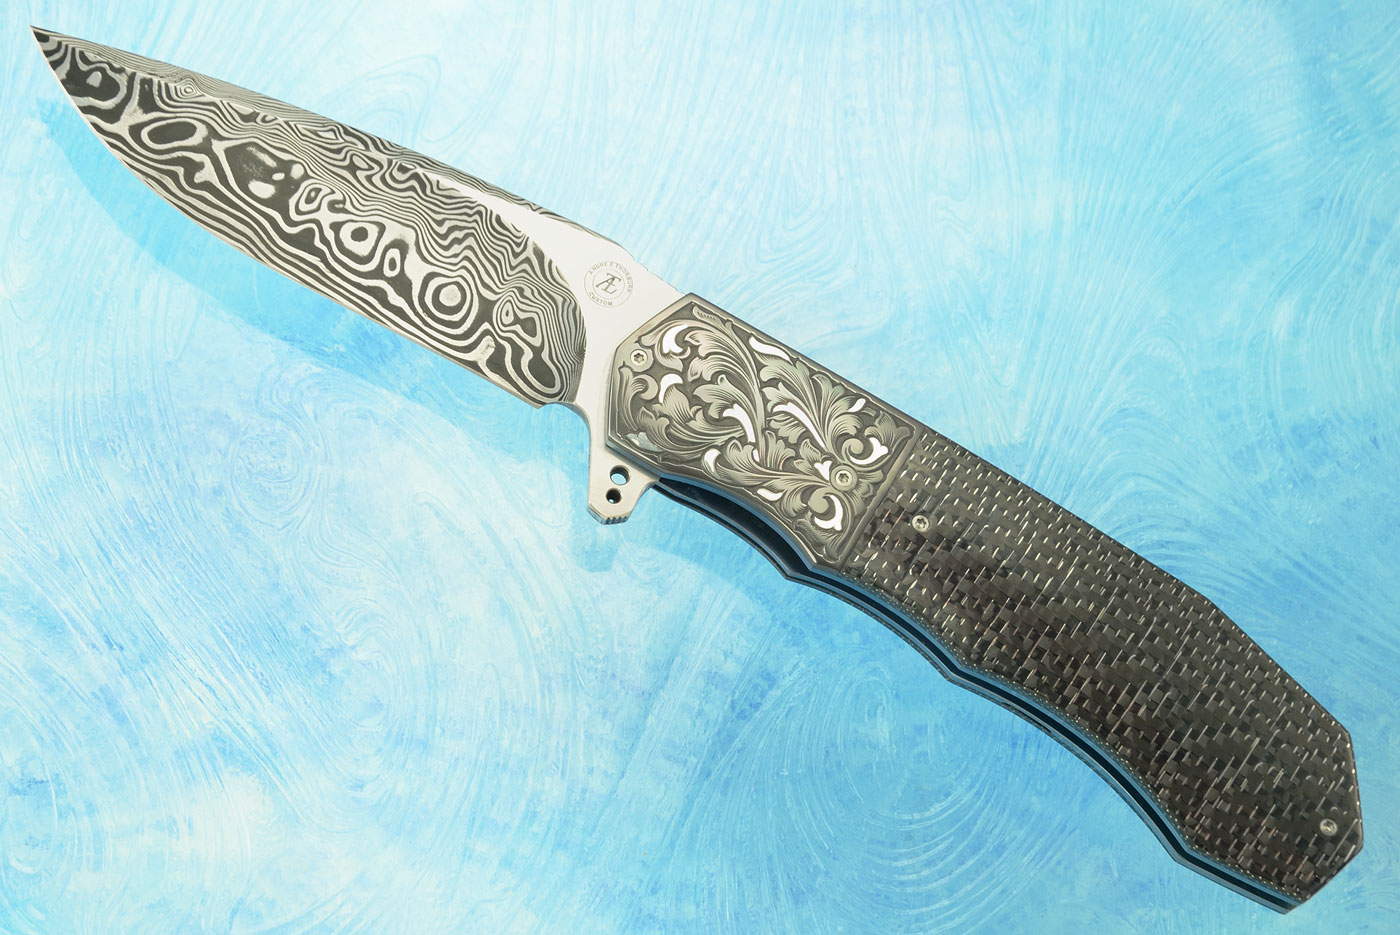 L44 Flipper with Damascus, Nickelwire Carbon Fiber, and Engraved Zirconium with Silver Inlay (Ceramic IKBS)